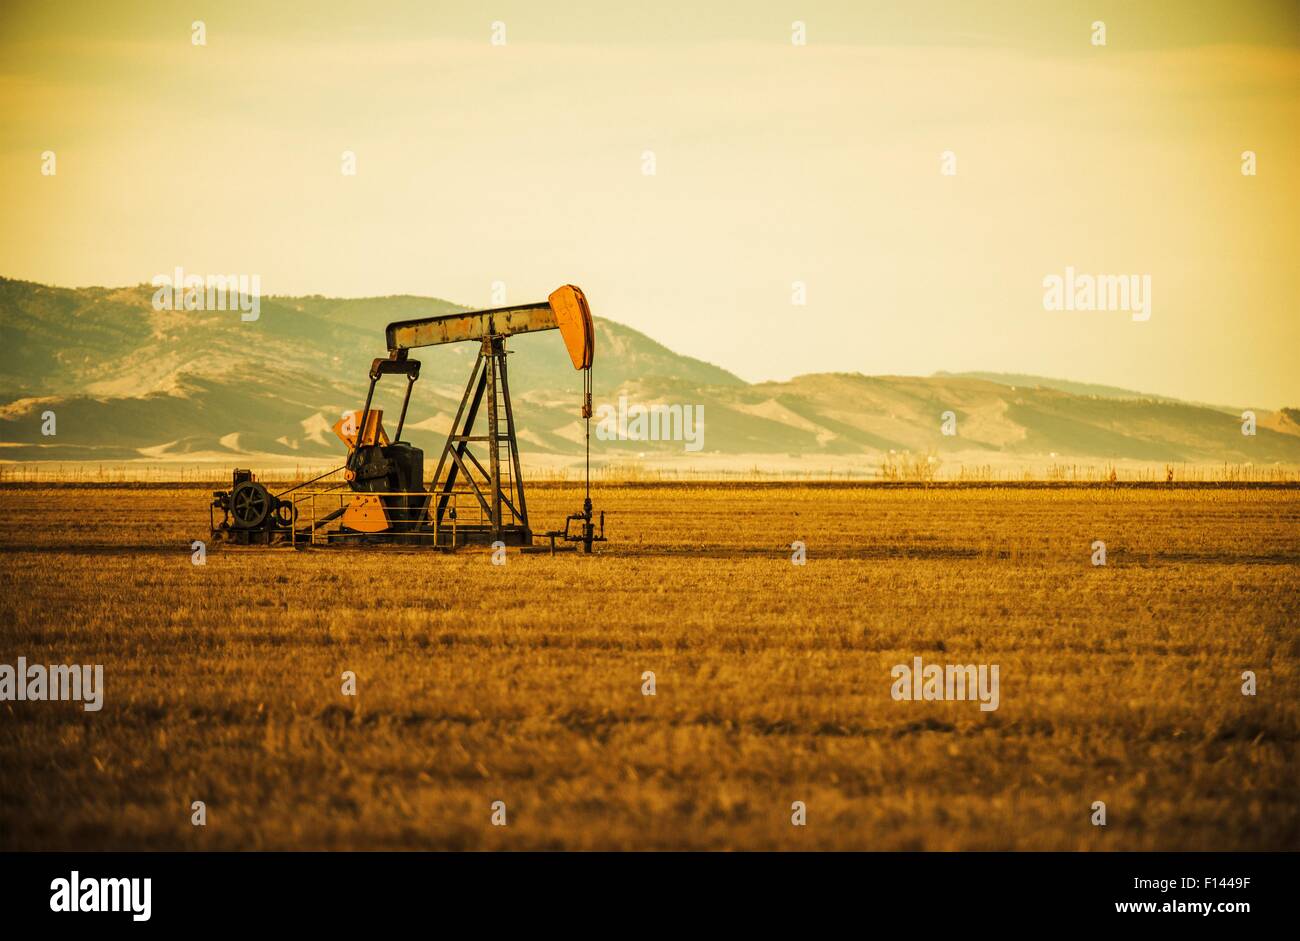 Aged Oil Pump on Colorado Prairie with Mountain Hills in the Background. Oil Industry Theme. Stock Photo